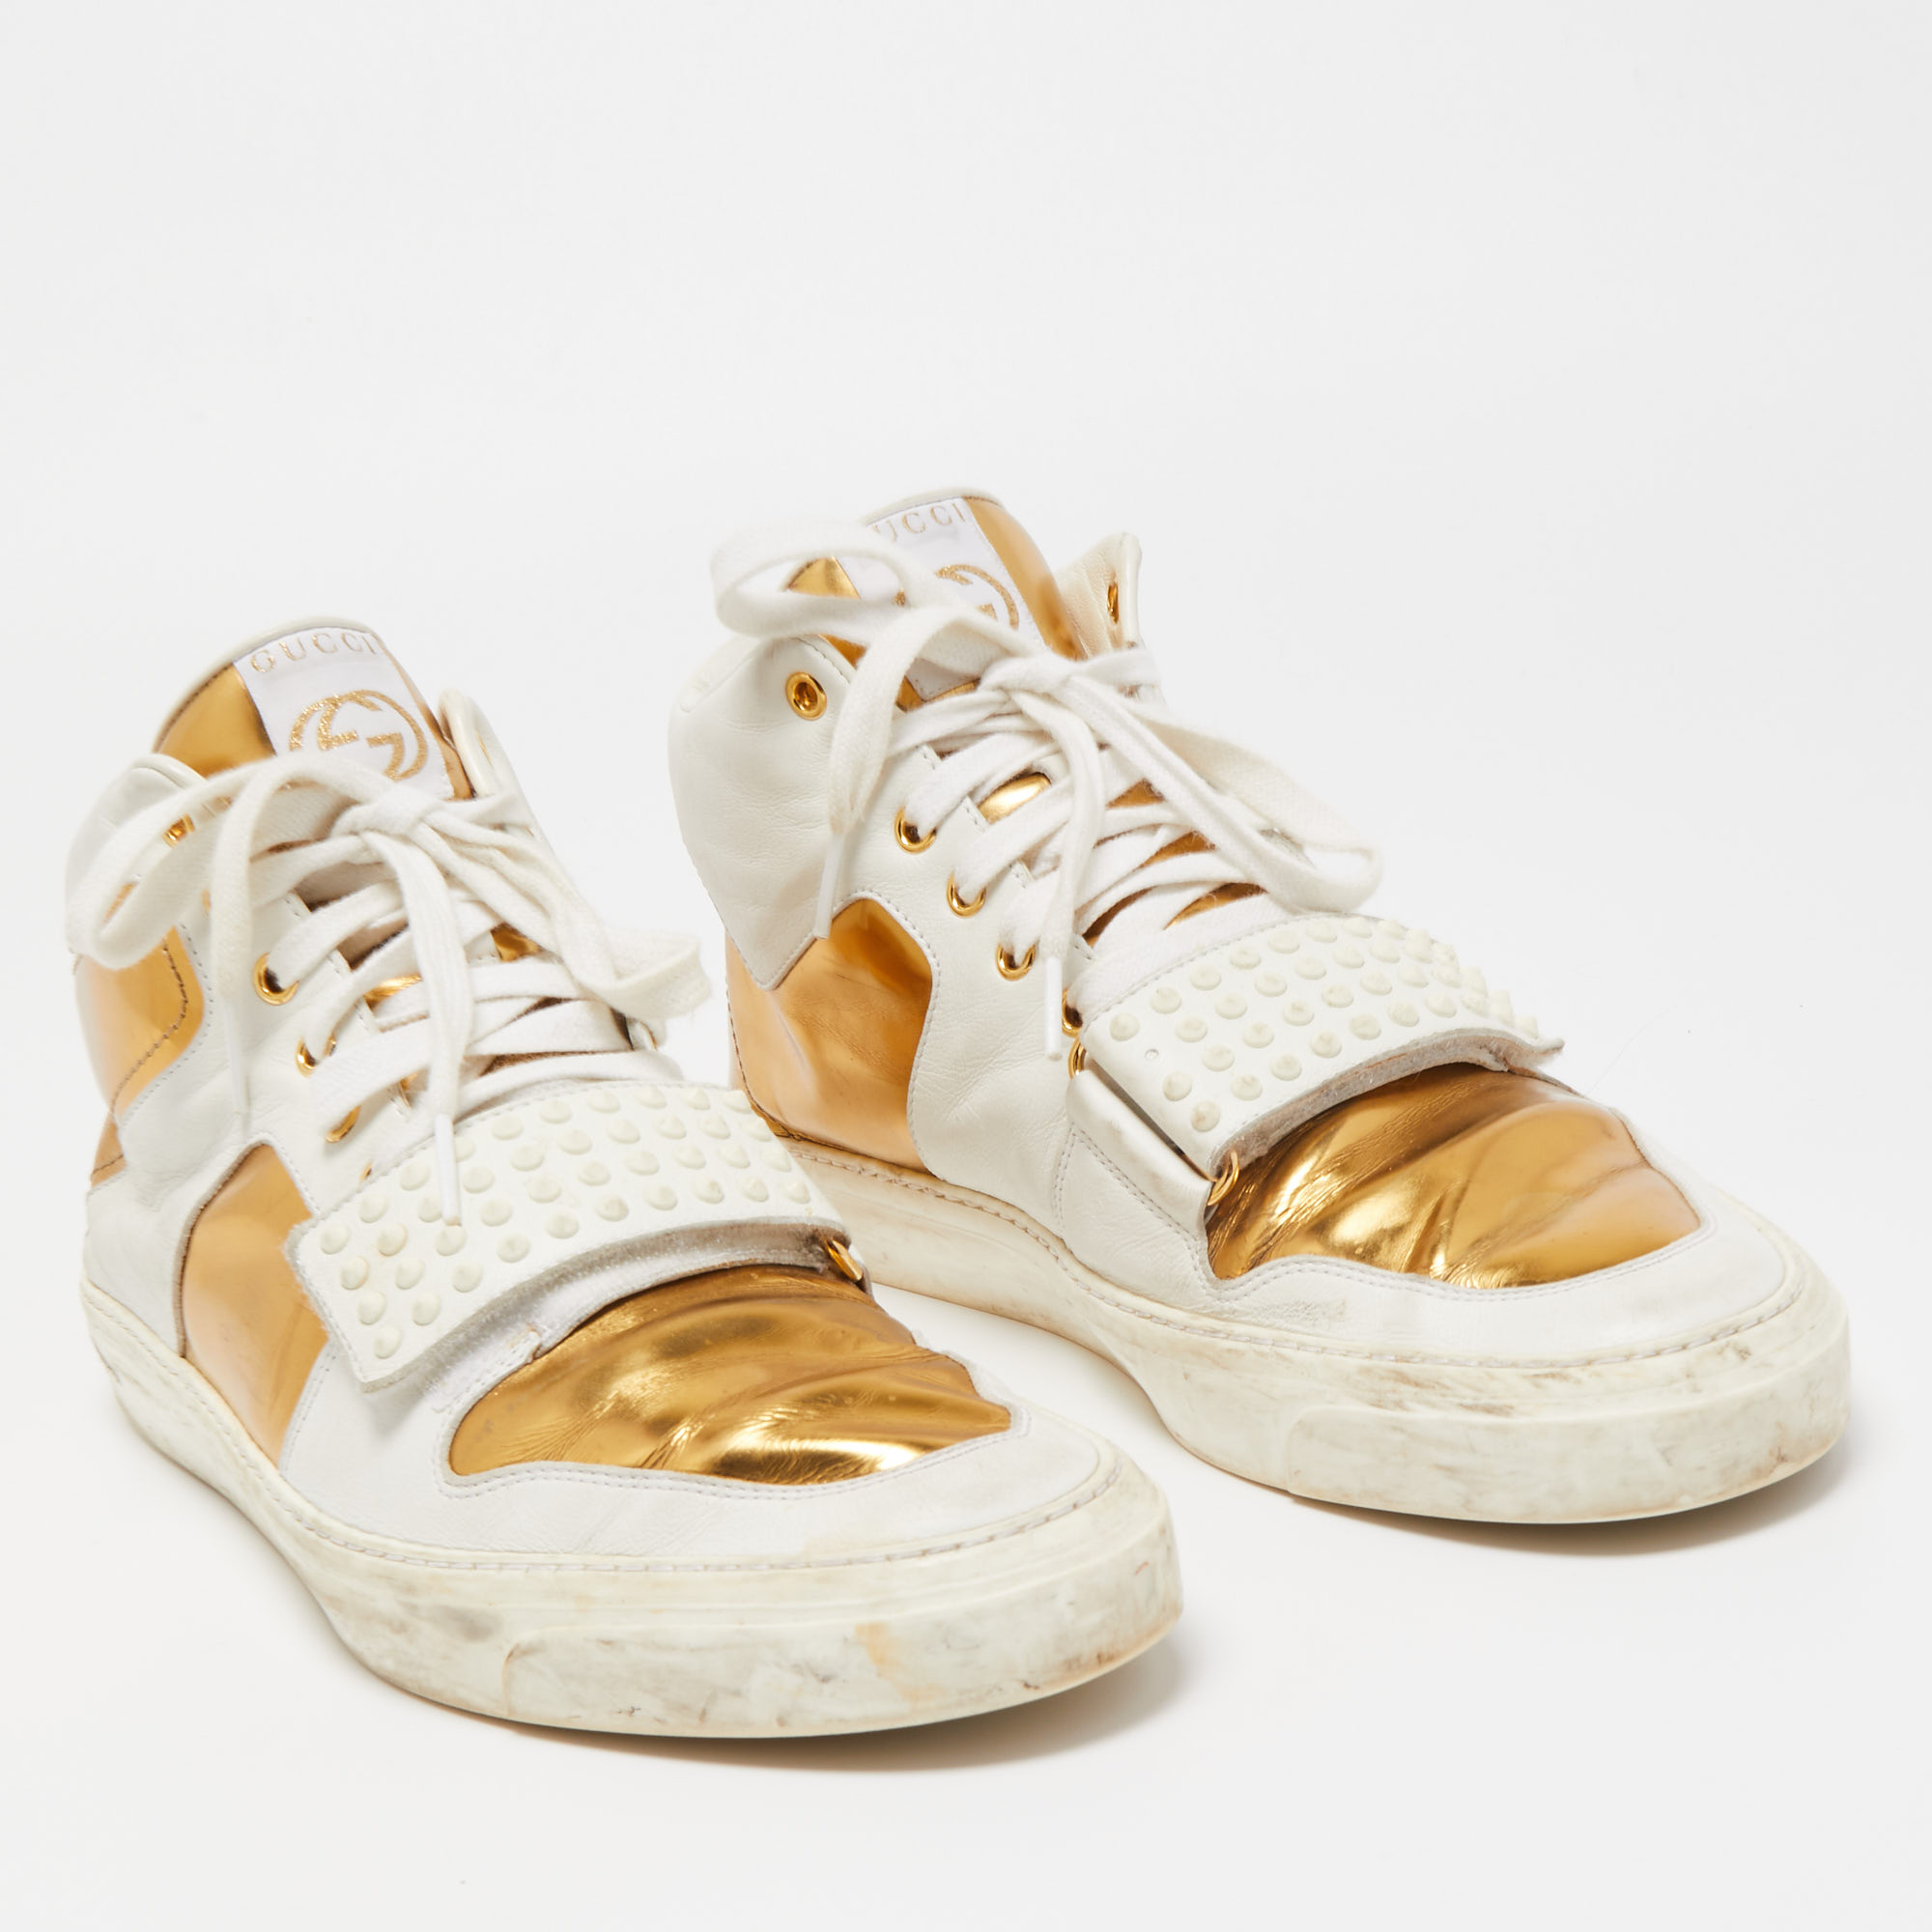 Gucci White/Gold Leather Lace Up High Top Sneakers Size 44